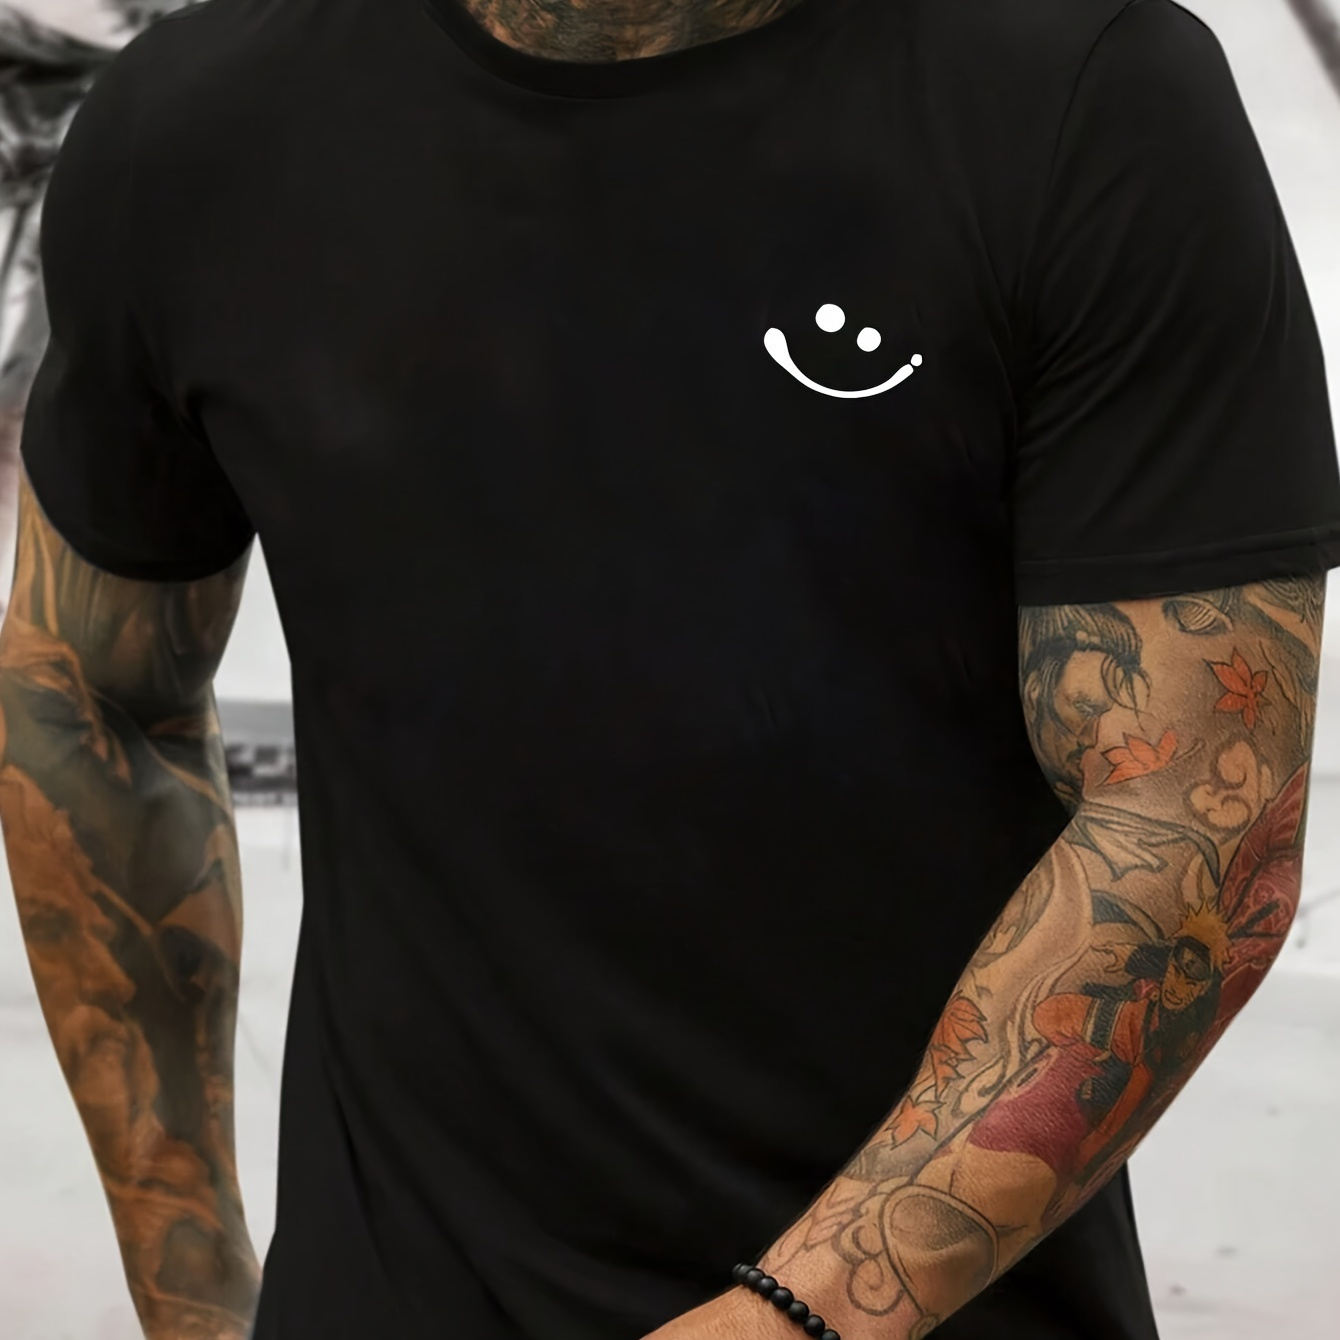 

Smile Face Print, Men's Round Crew Neck Short Sleeve, Simple Style Tee Fashion Regular Fit T-shirt, Casual Comfy Breathable Top For Spring Summer Holiday Leisure Vacation Men's Clothing As Gift